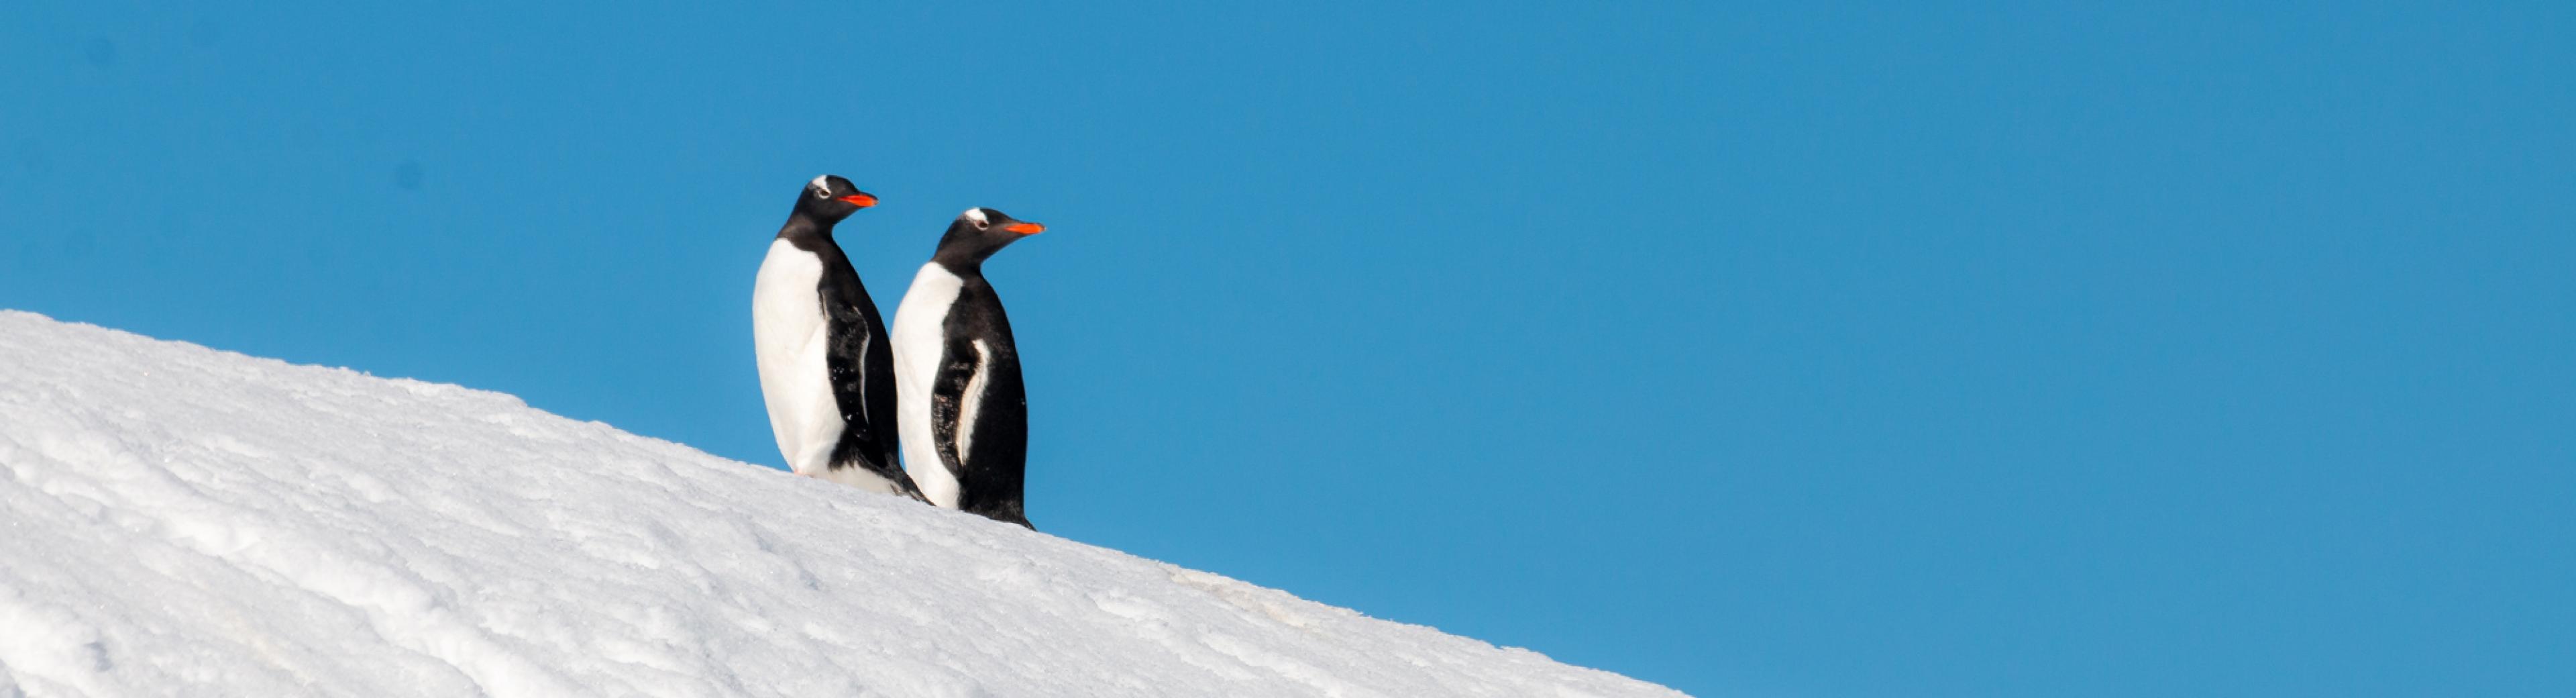 penguins on a hill